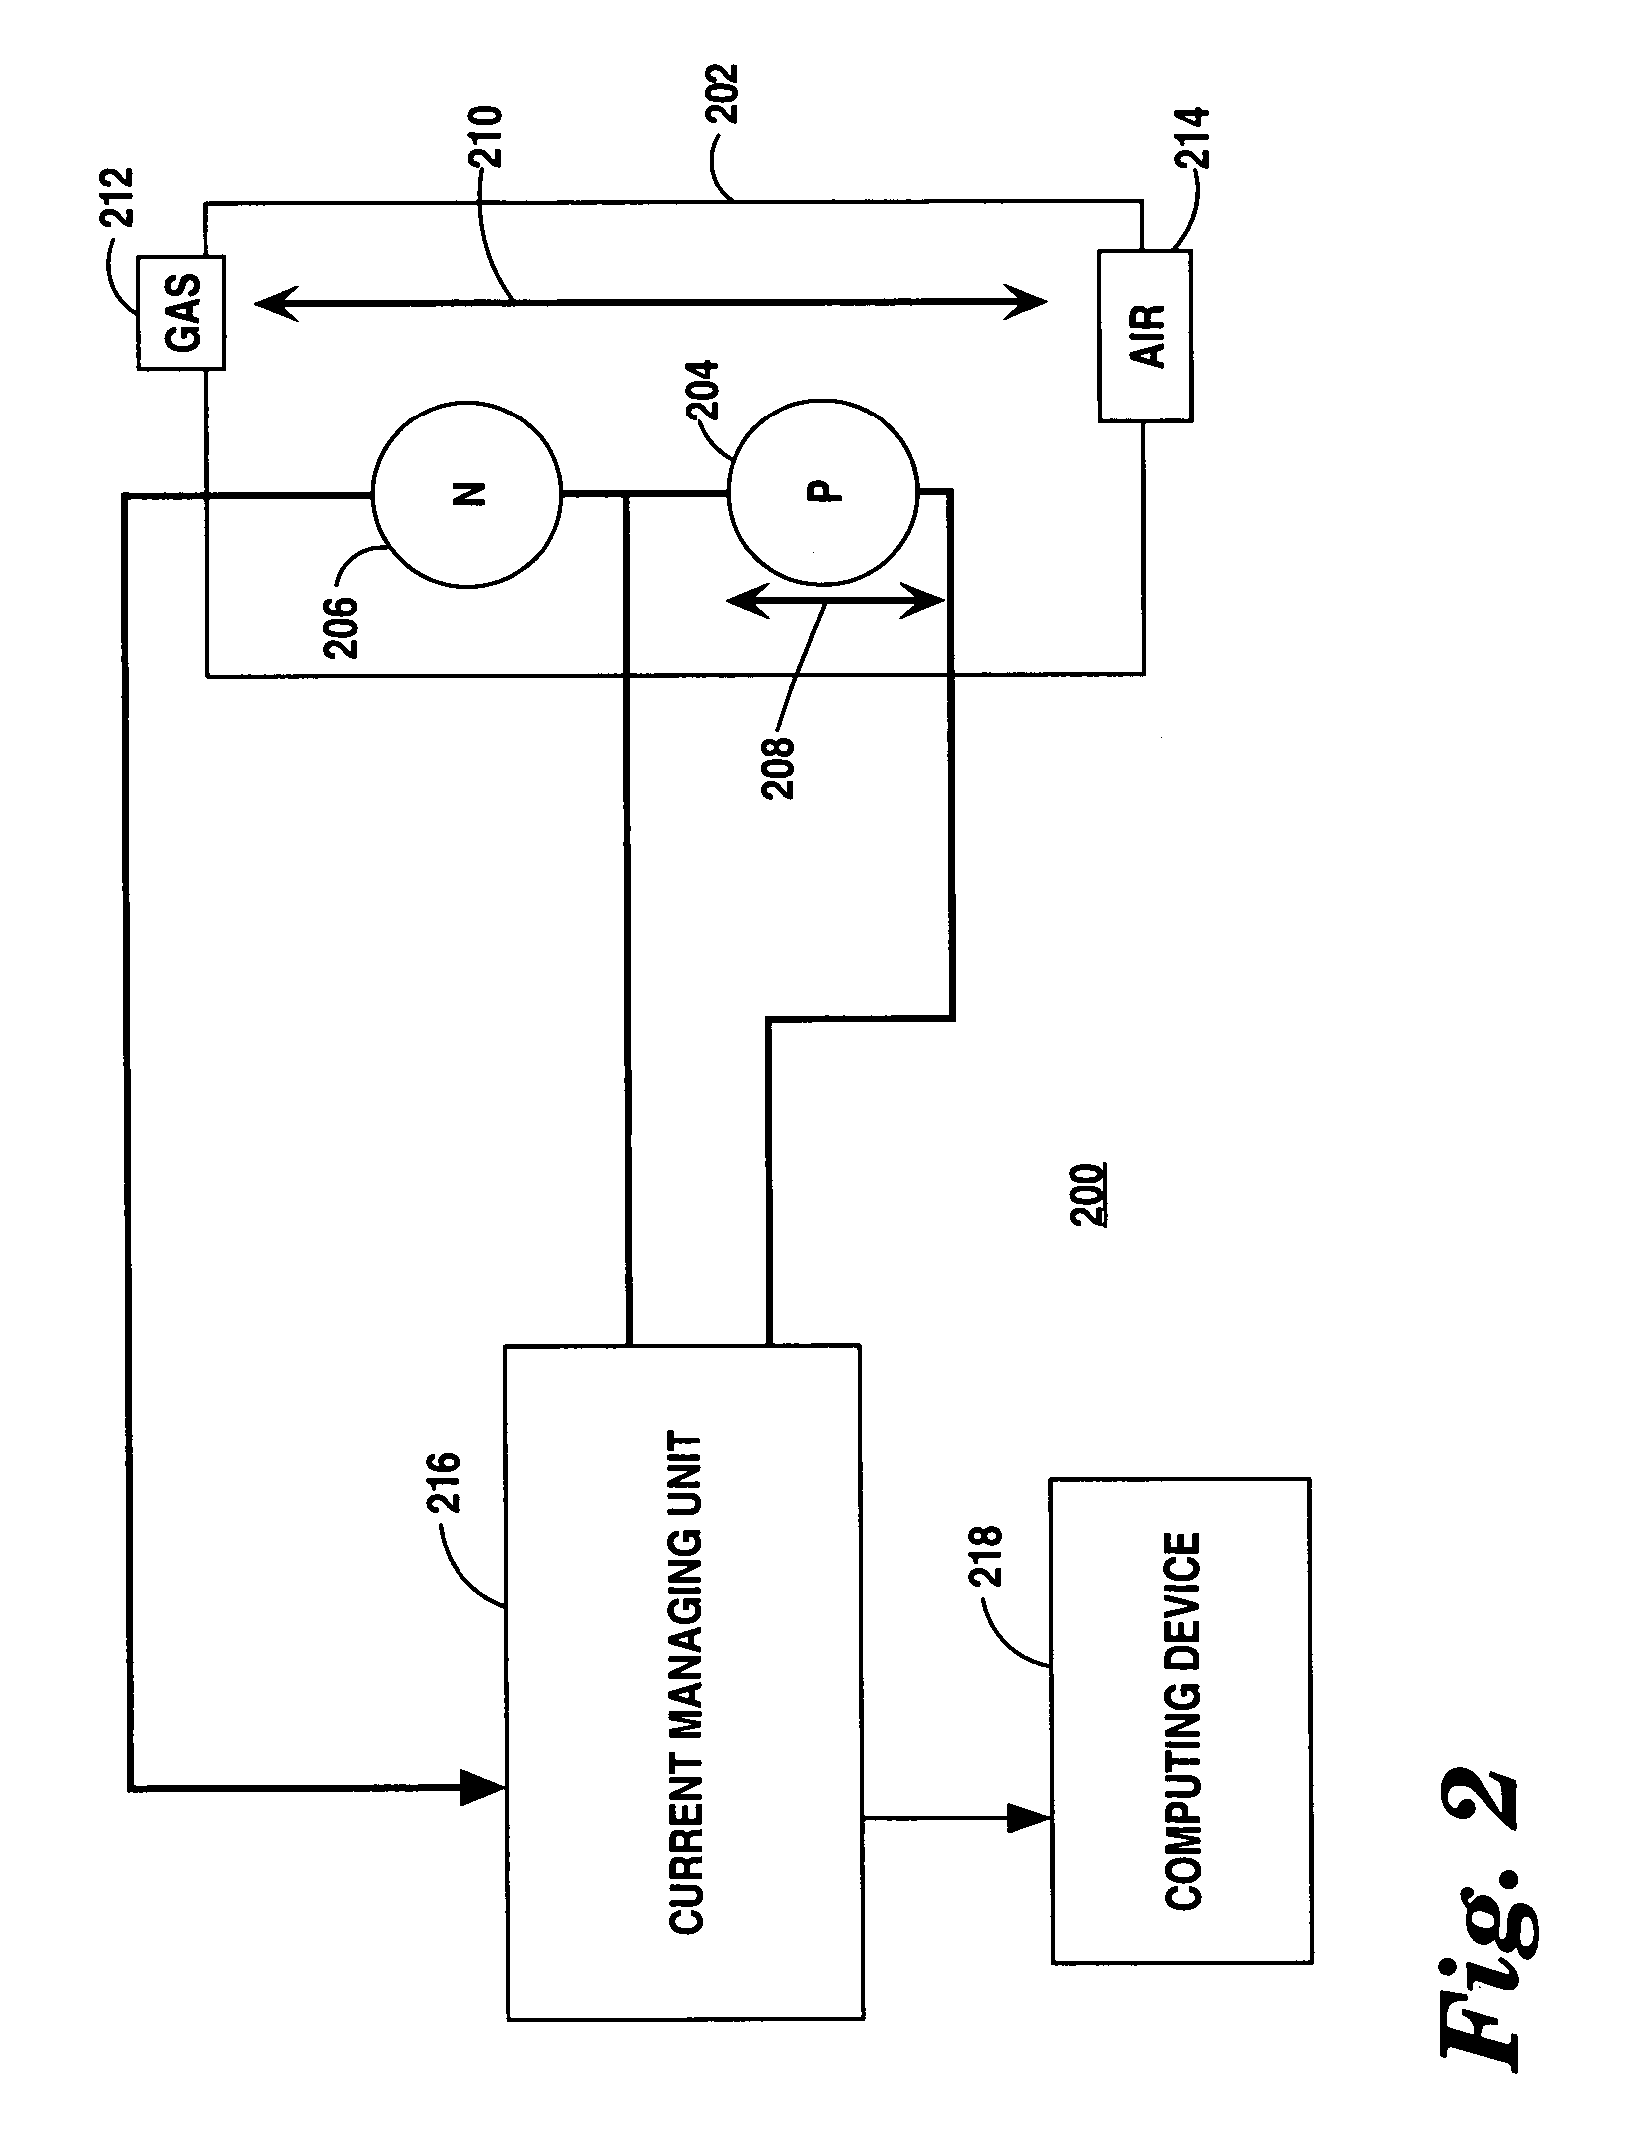 System, apparatus, and method for measuring an oxygen concentration of a gas